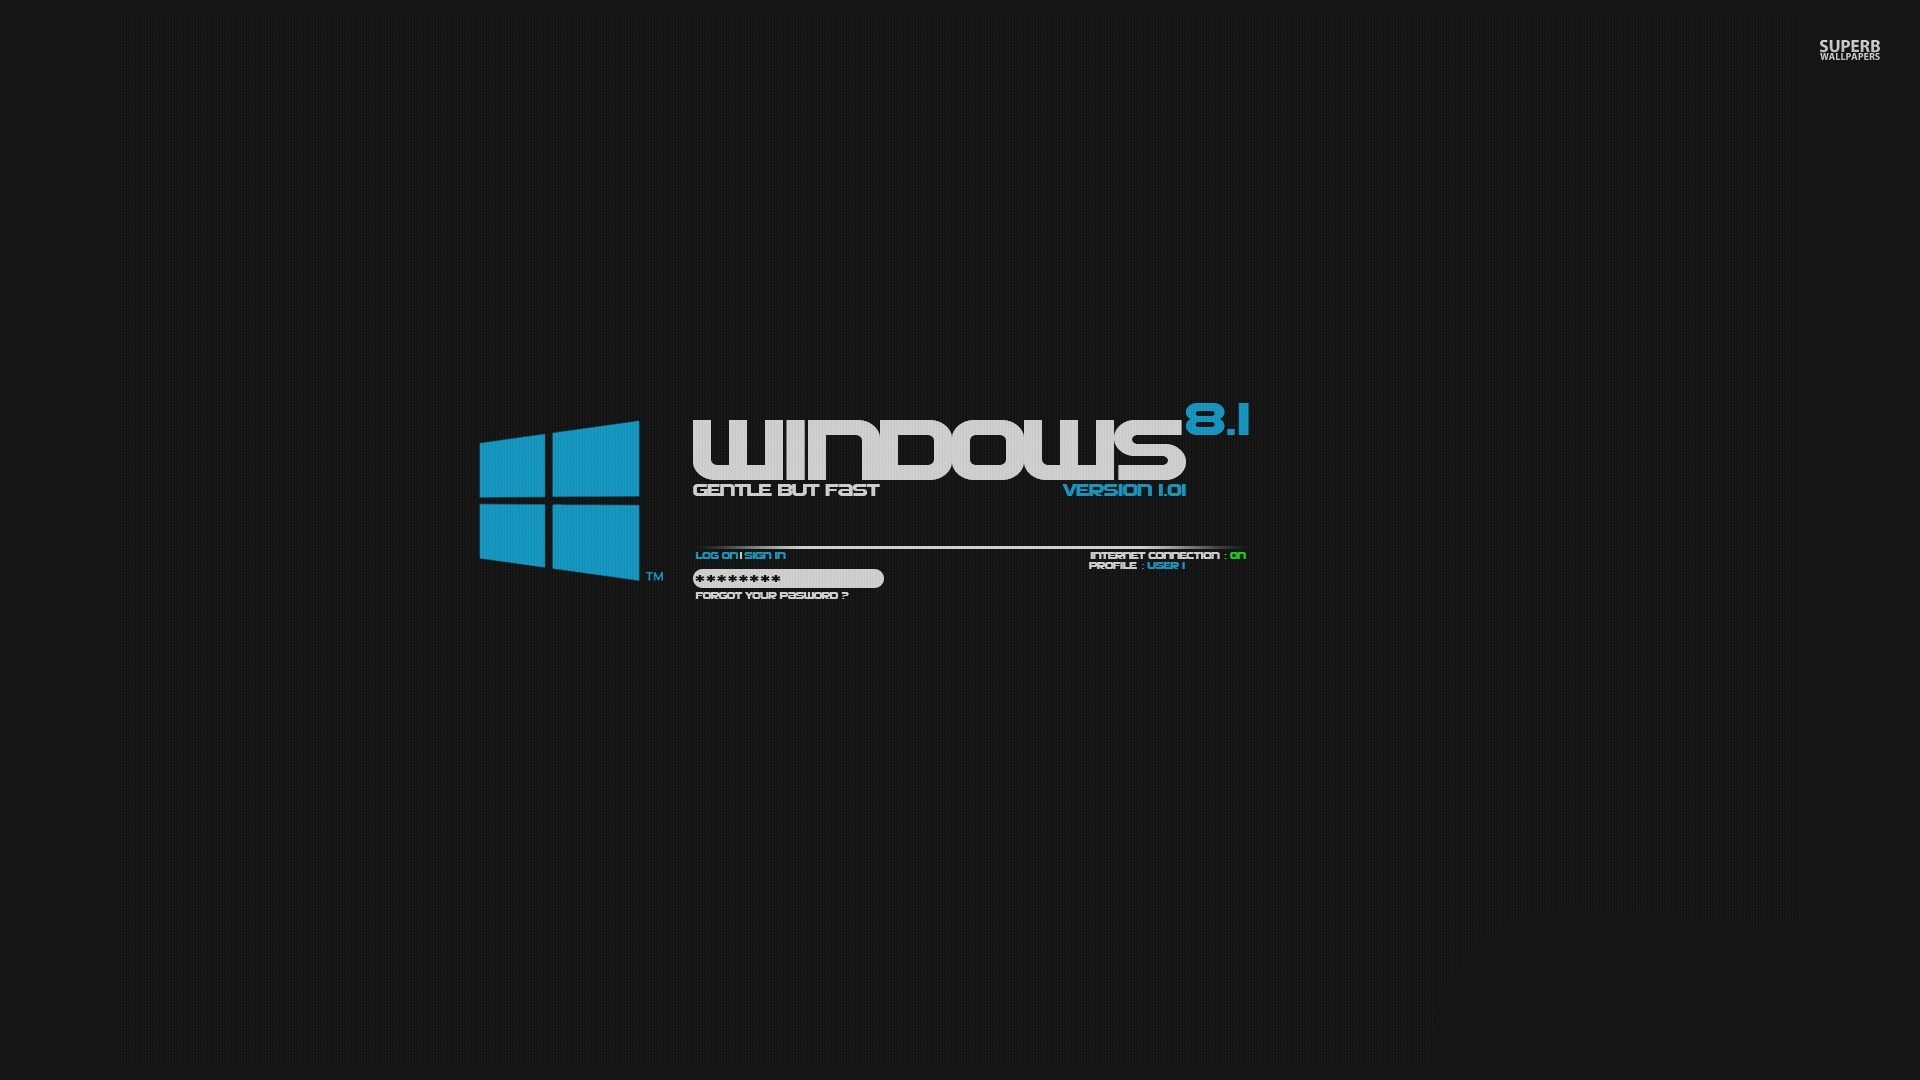 Windows 81 in Black Background Wallpaper   MixHD wallpapers